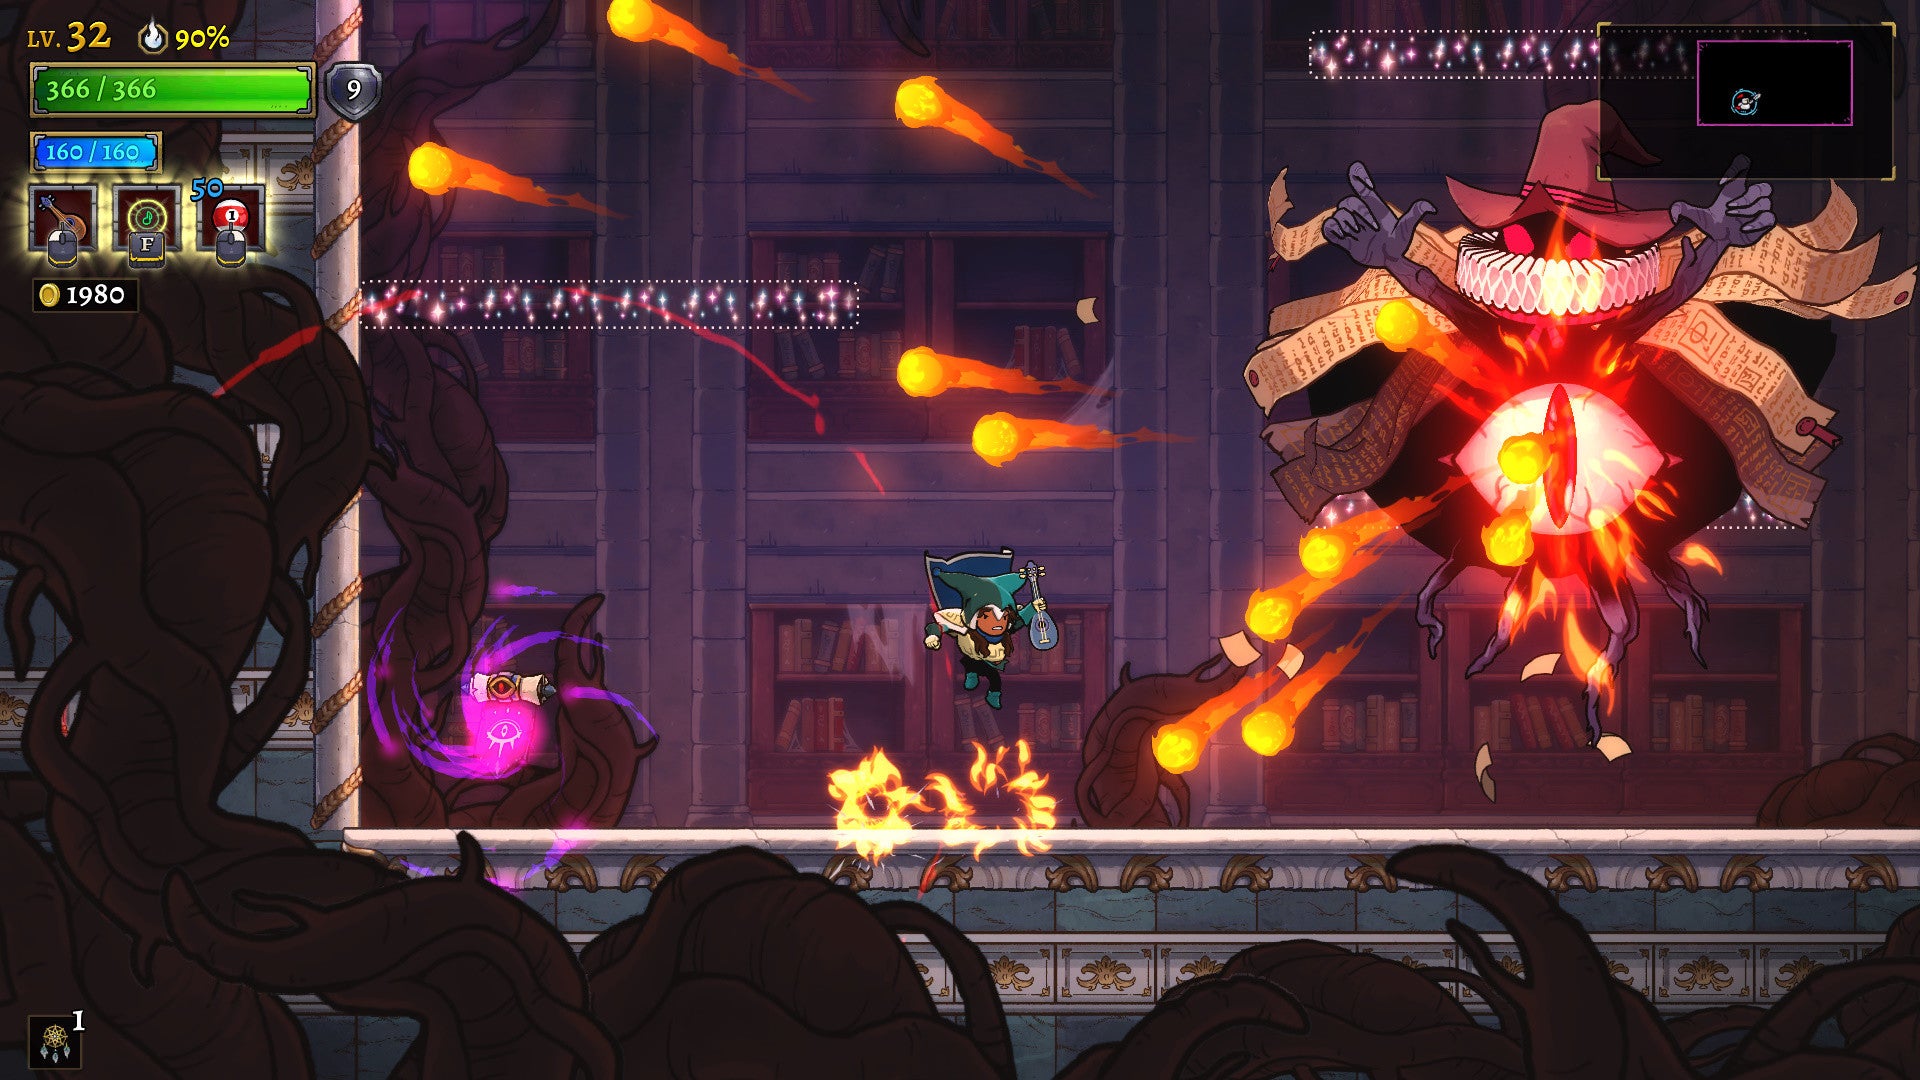 The player dodges fireballs from a big wizard boss in Rogue Legacy 2.